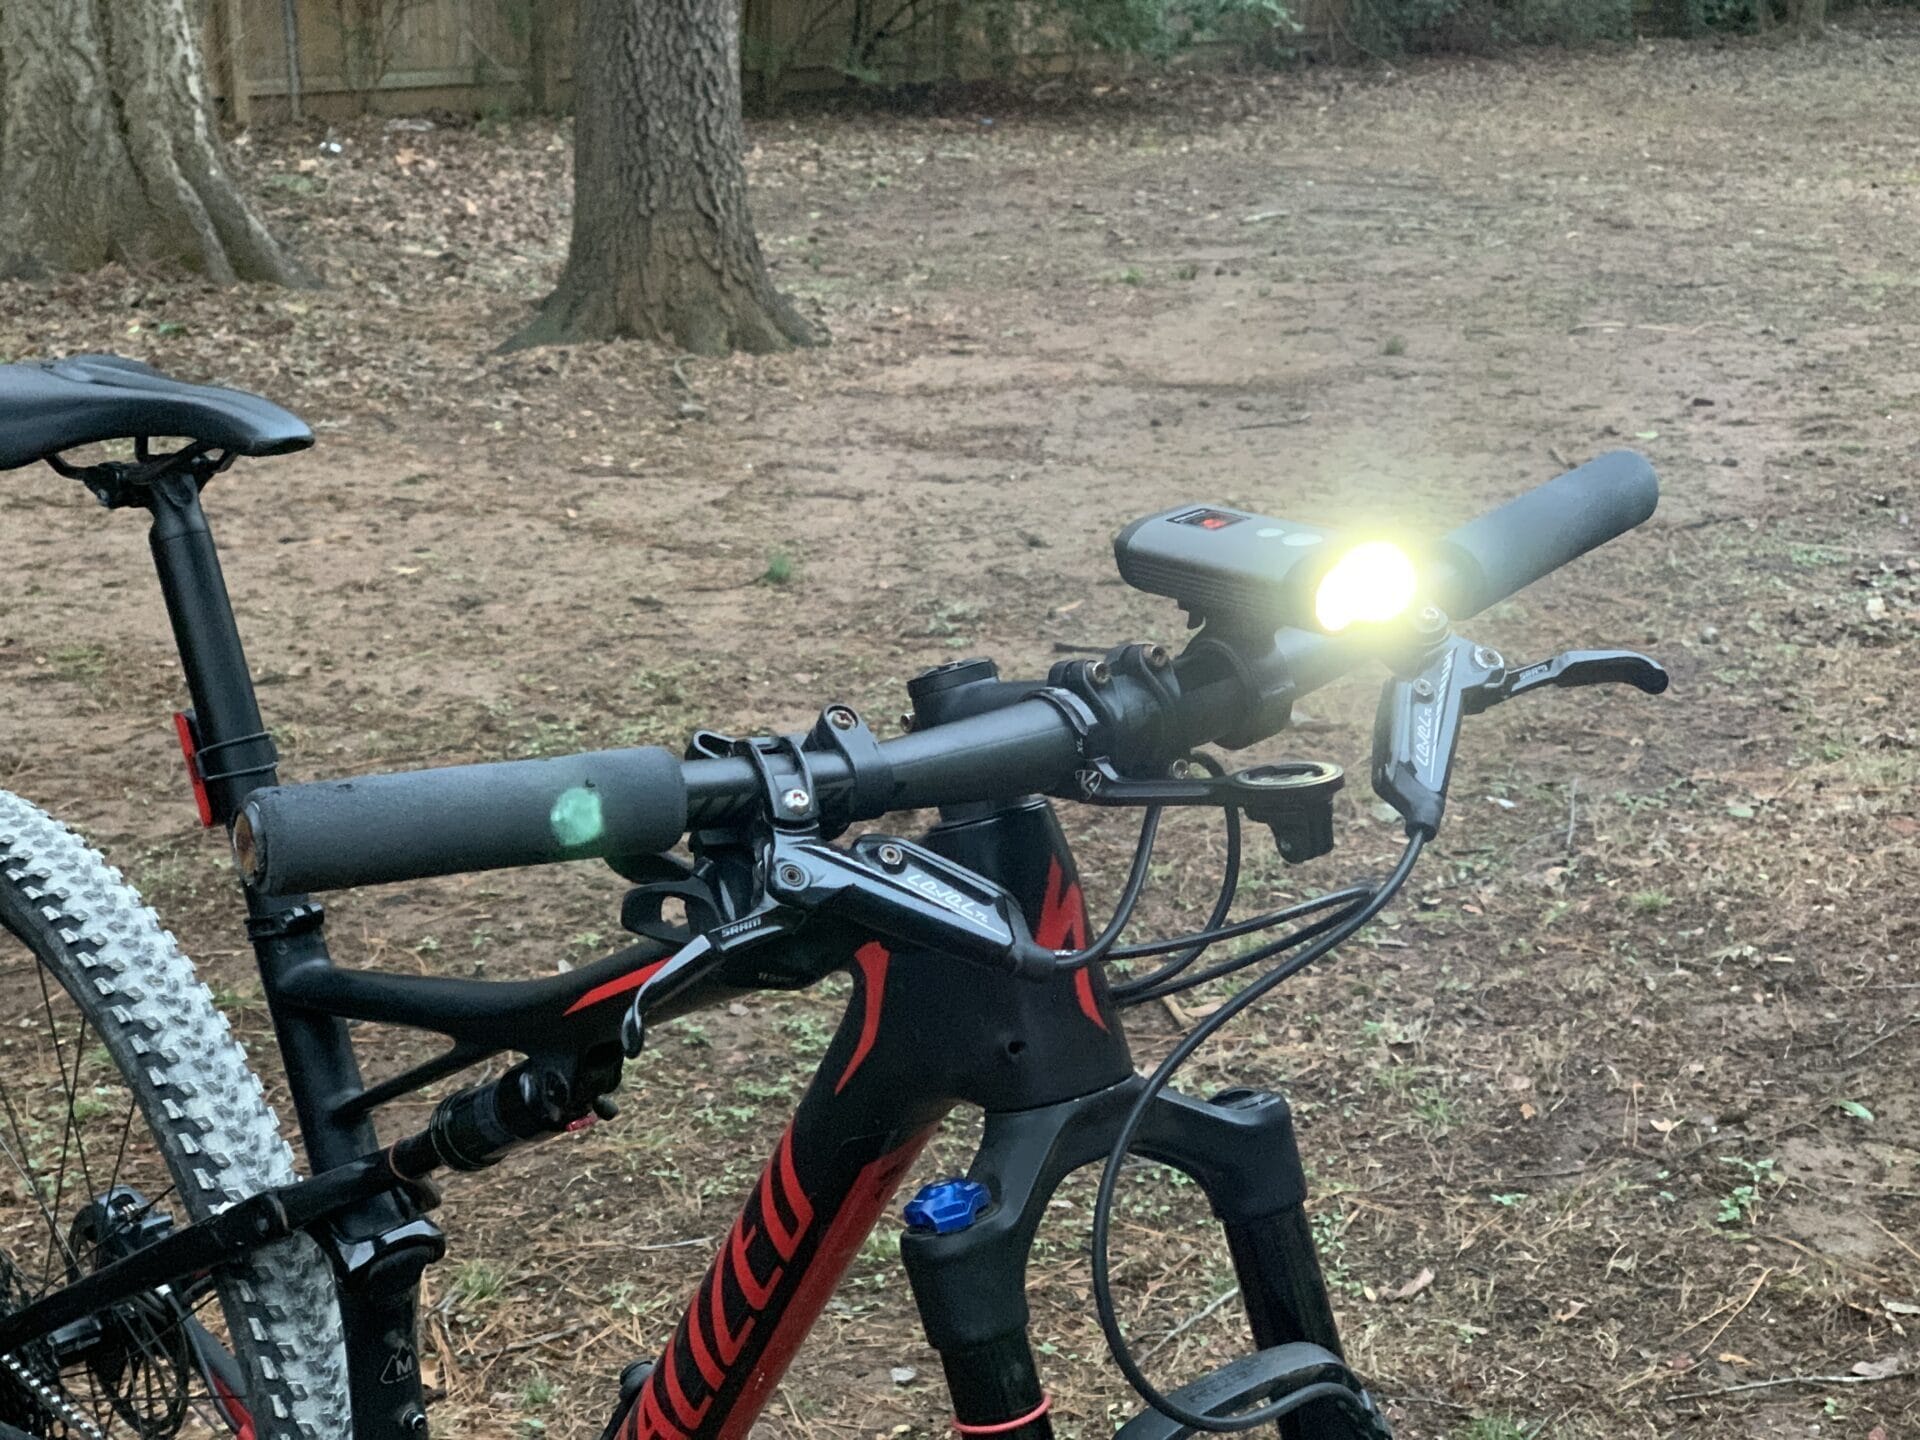 Ravemen PR2000 on the mtb with the light on in low beam mode